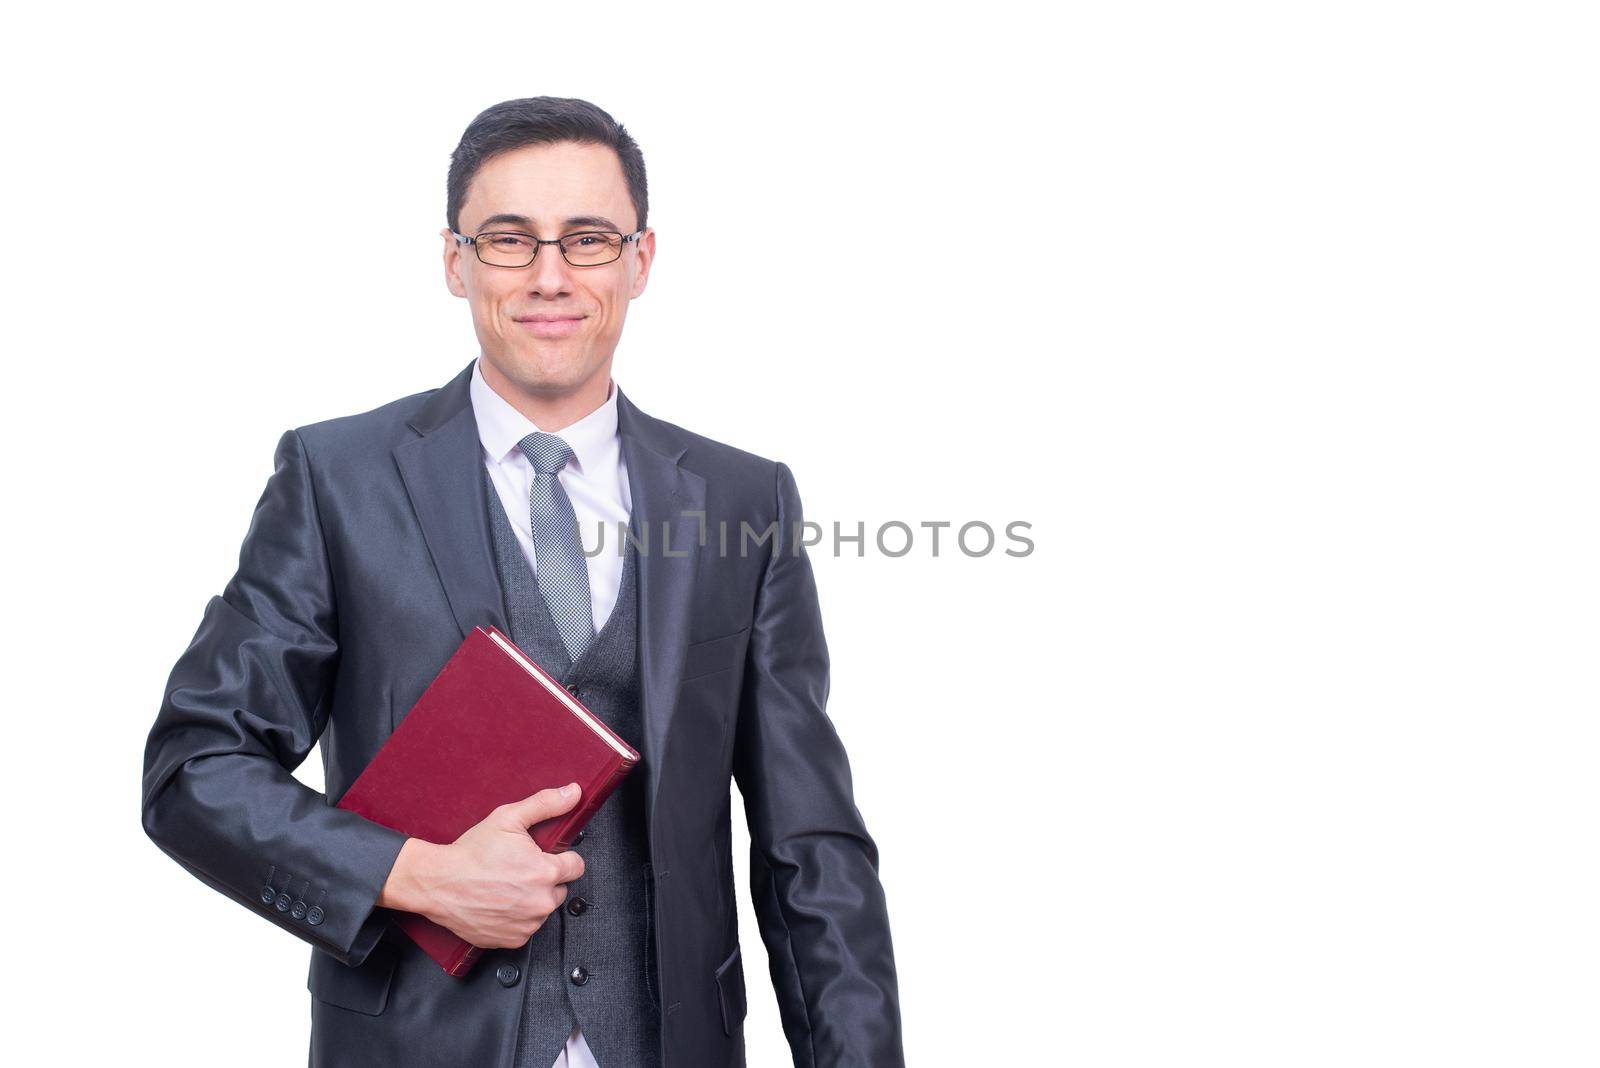 Positive male teacher in formal suit and eyeglasses holding red book and looking at camera with smile isolated on white background